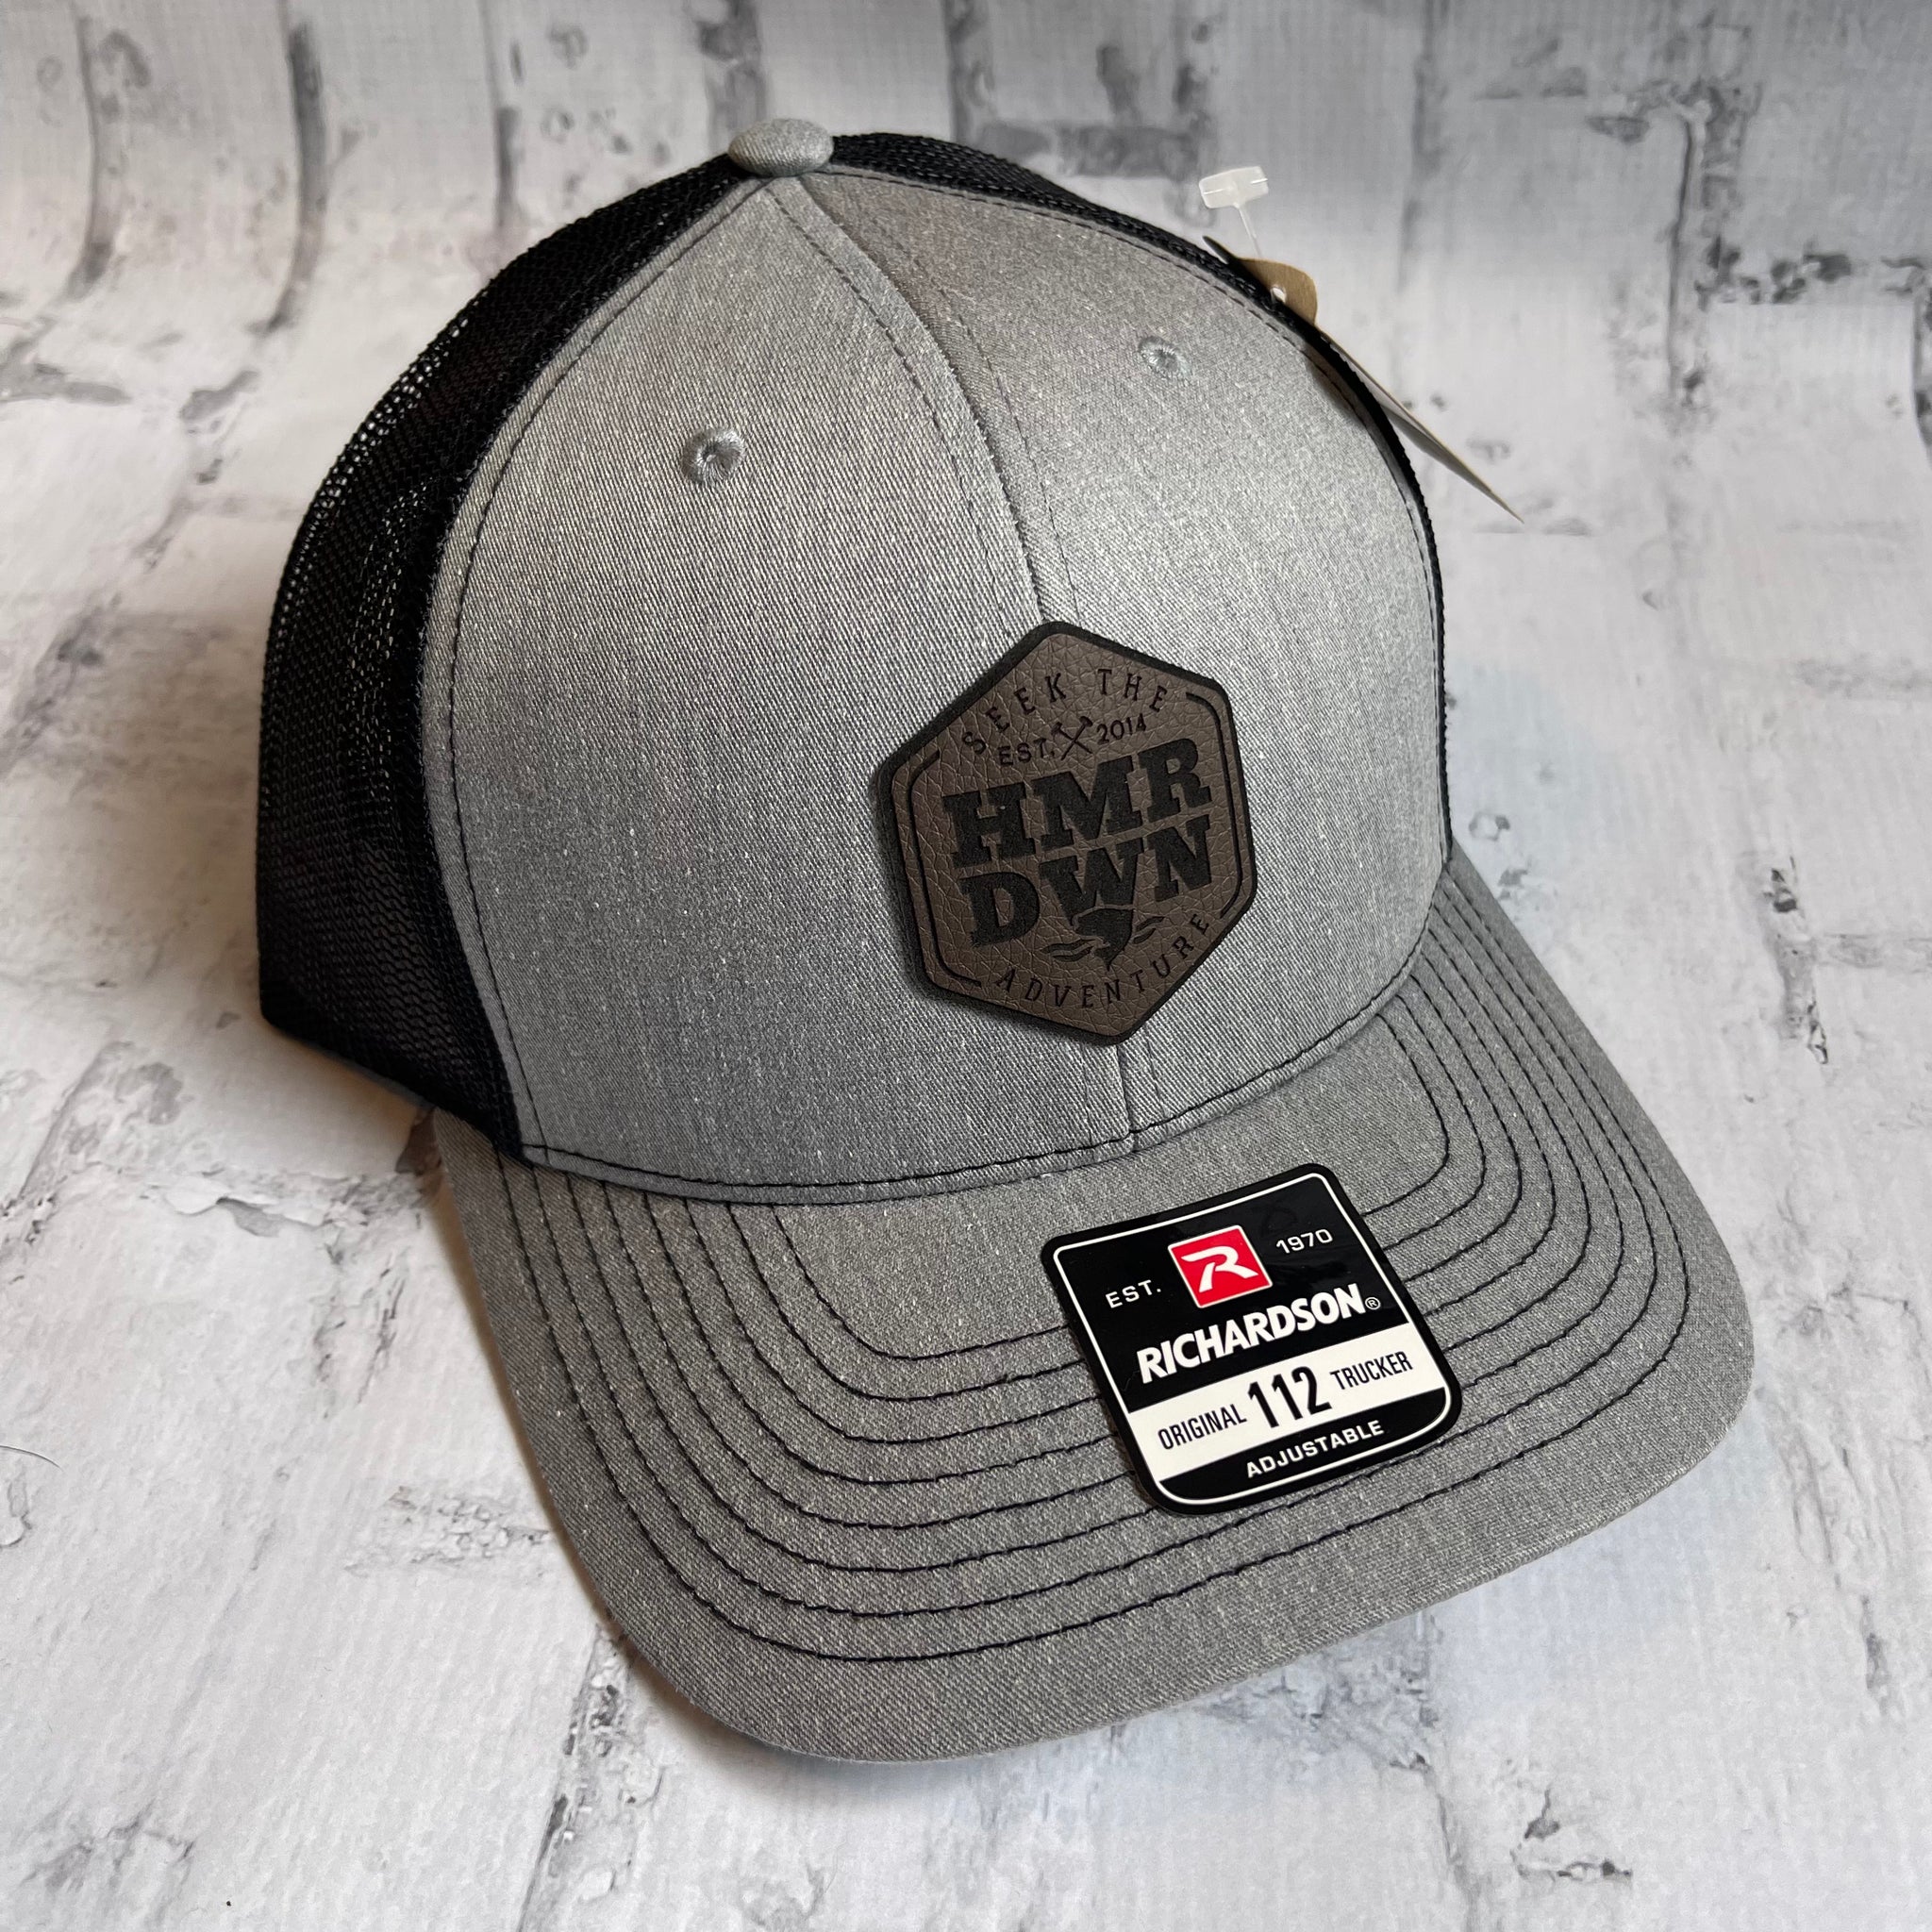 Hammer Down "HMR DWN Bass" Hat - Heather Gray with Leather Patch - Southern Charm "Shop The Charm"